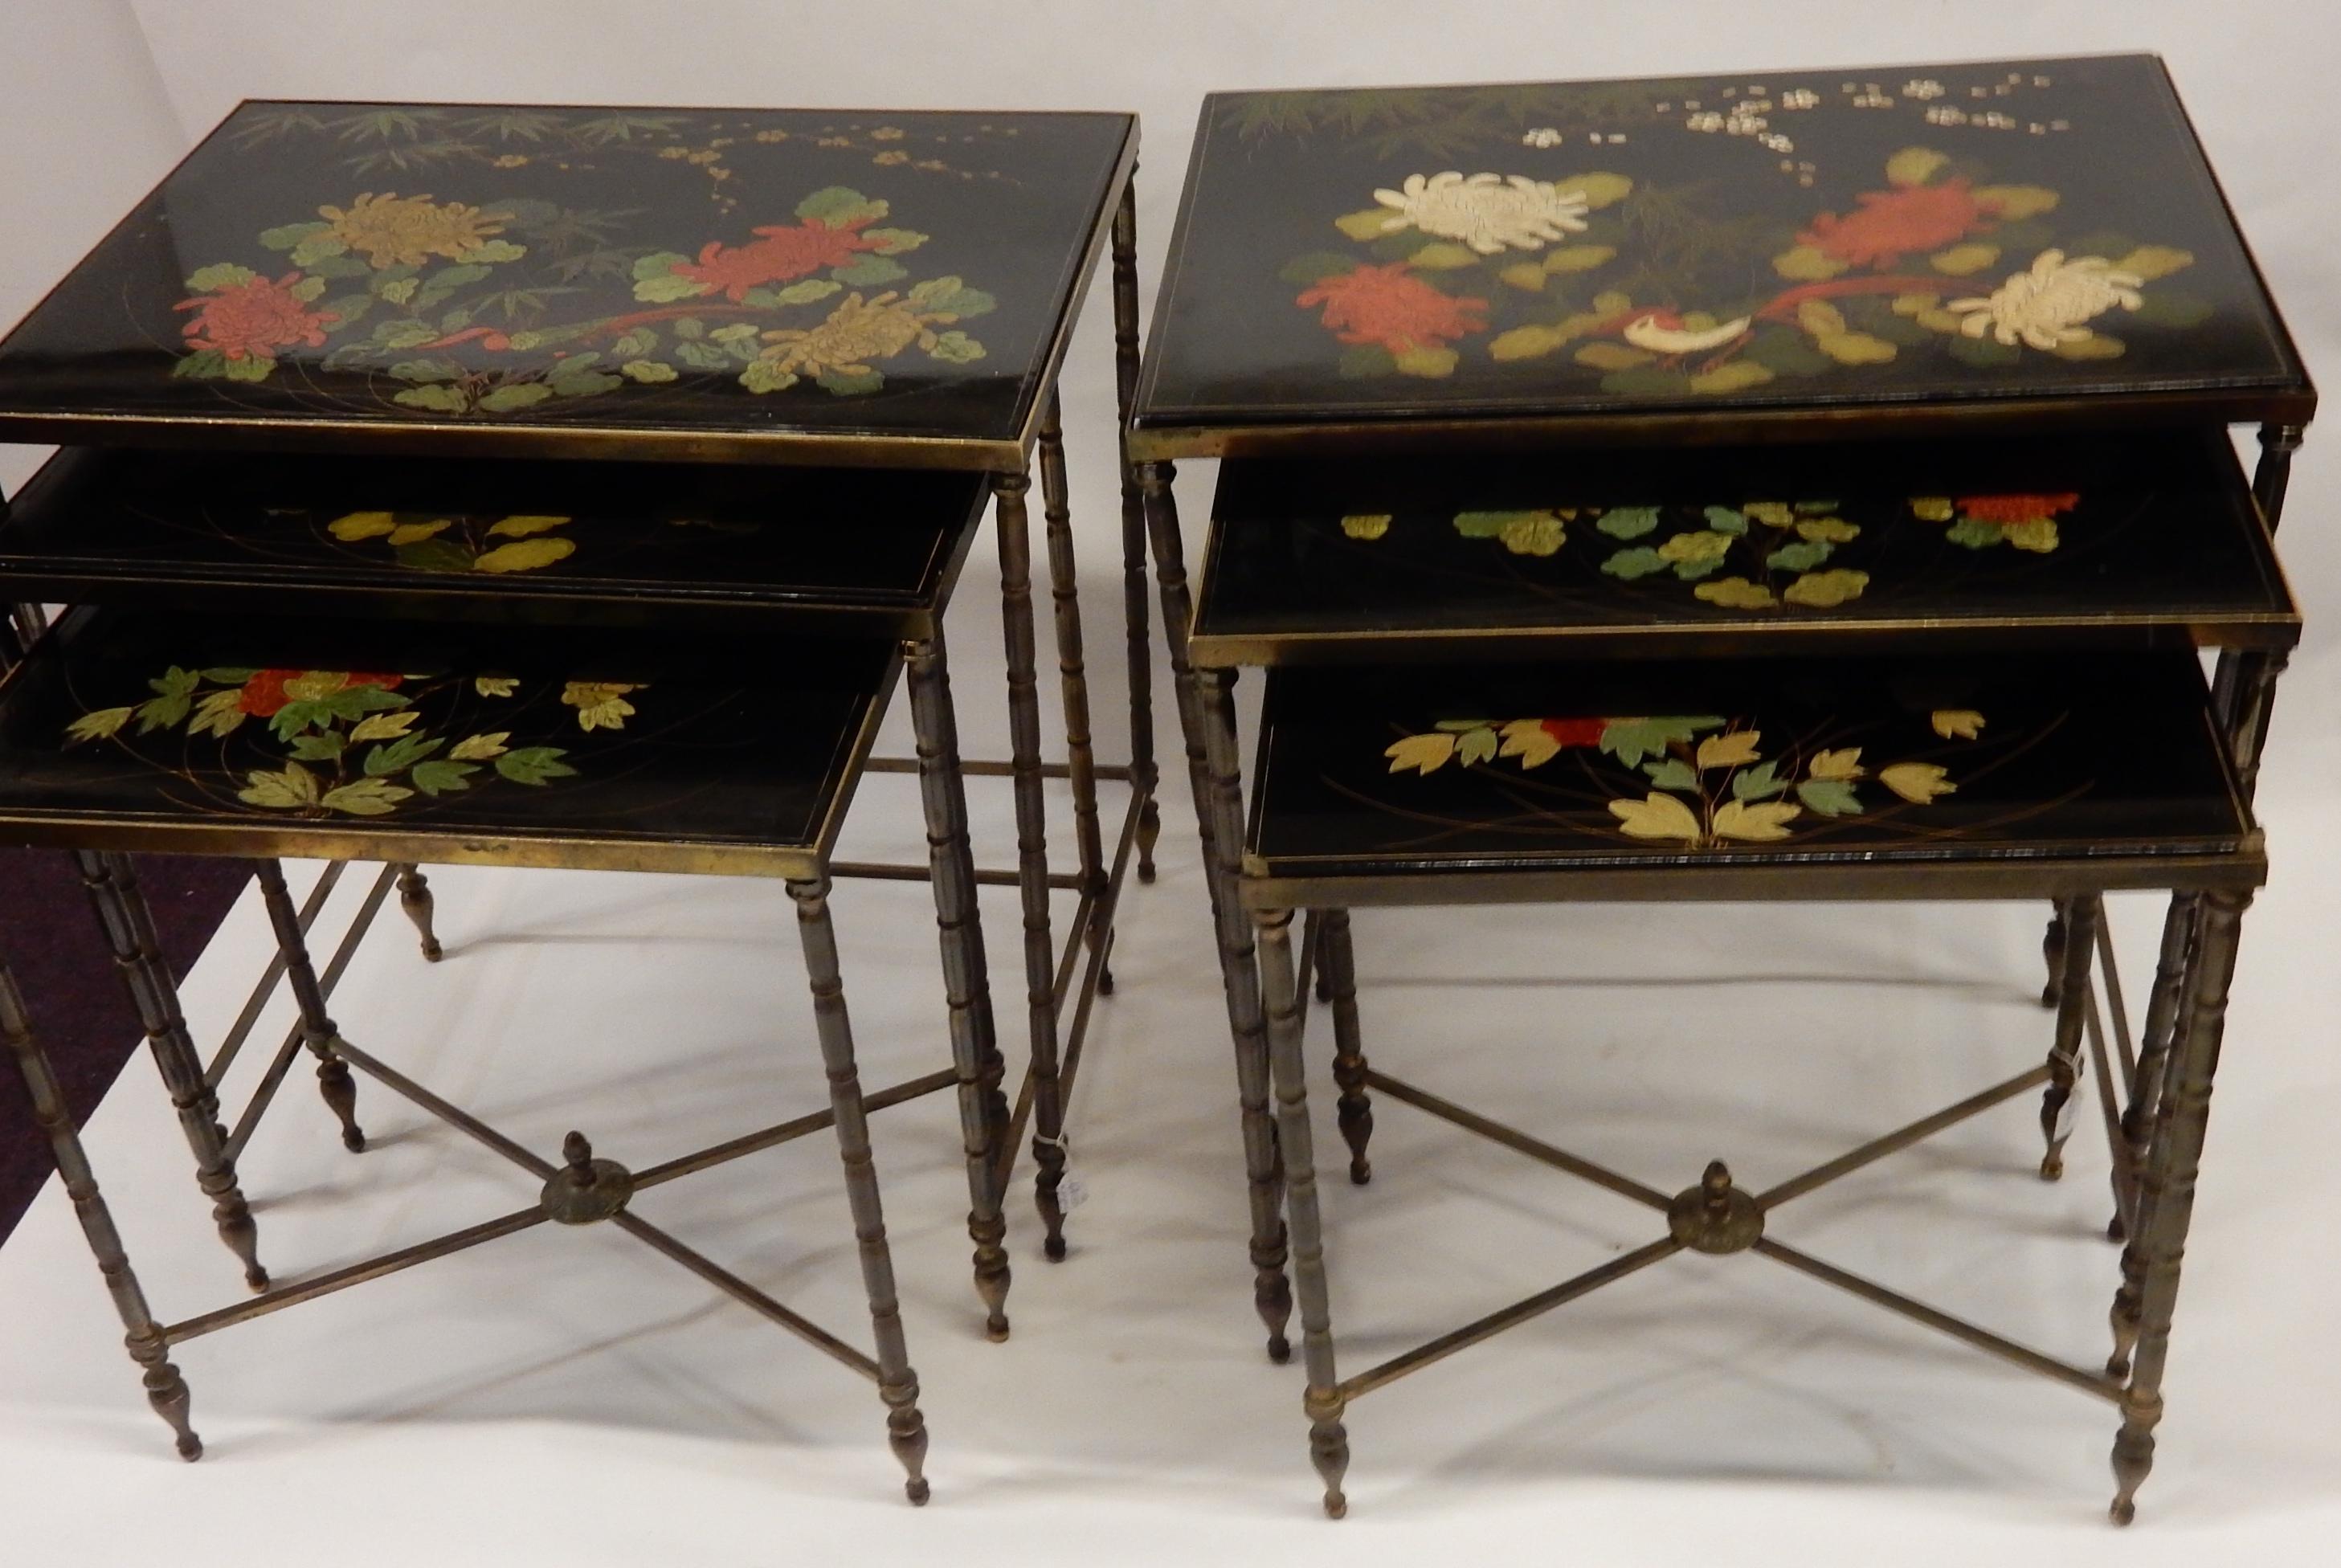 Neoclassical 1950-1970 Pair of Series of 3 Nesting Tables For Sale